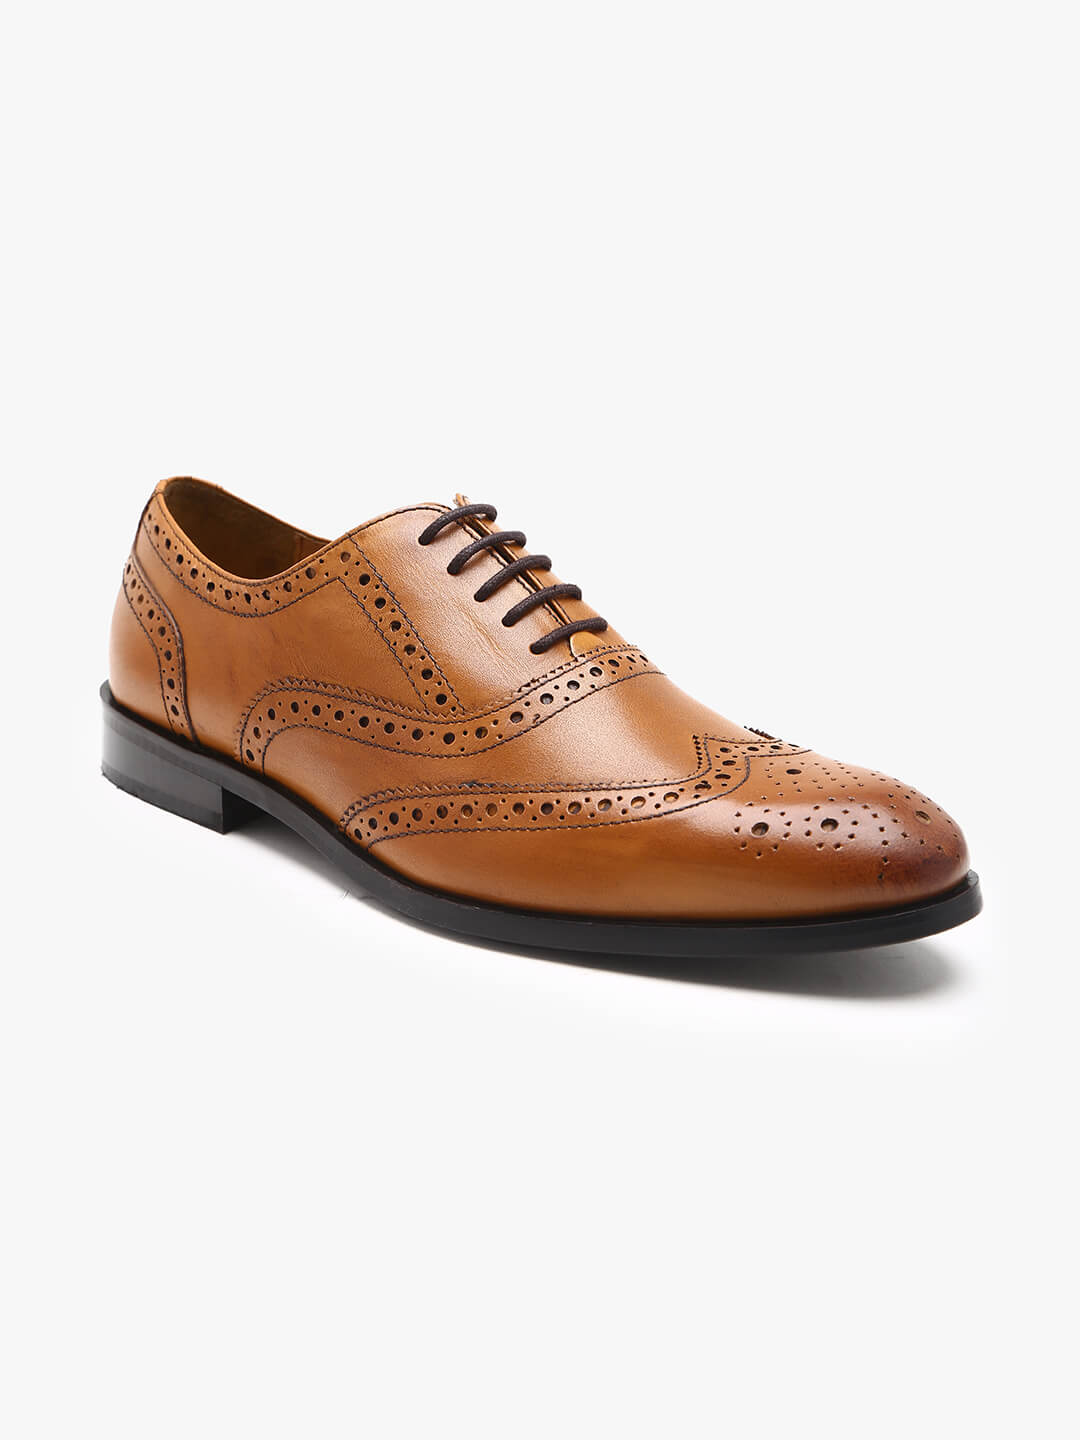 Buy Online Genuine Leather Tan Brogues Shoes online in India